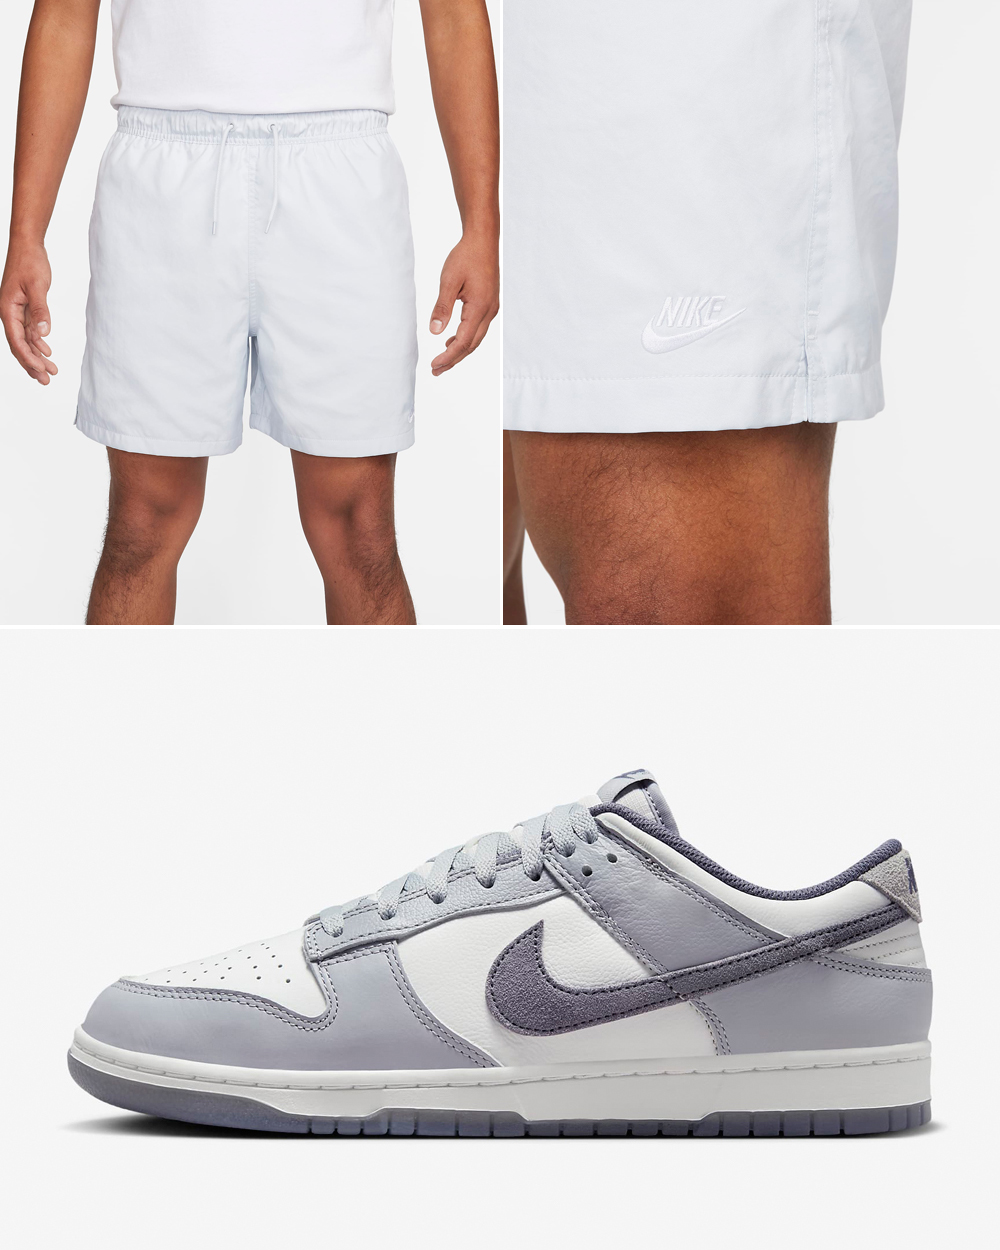 Nike-Dunk-Low-Light-Carbon-Woven-Shorts-Outfit